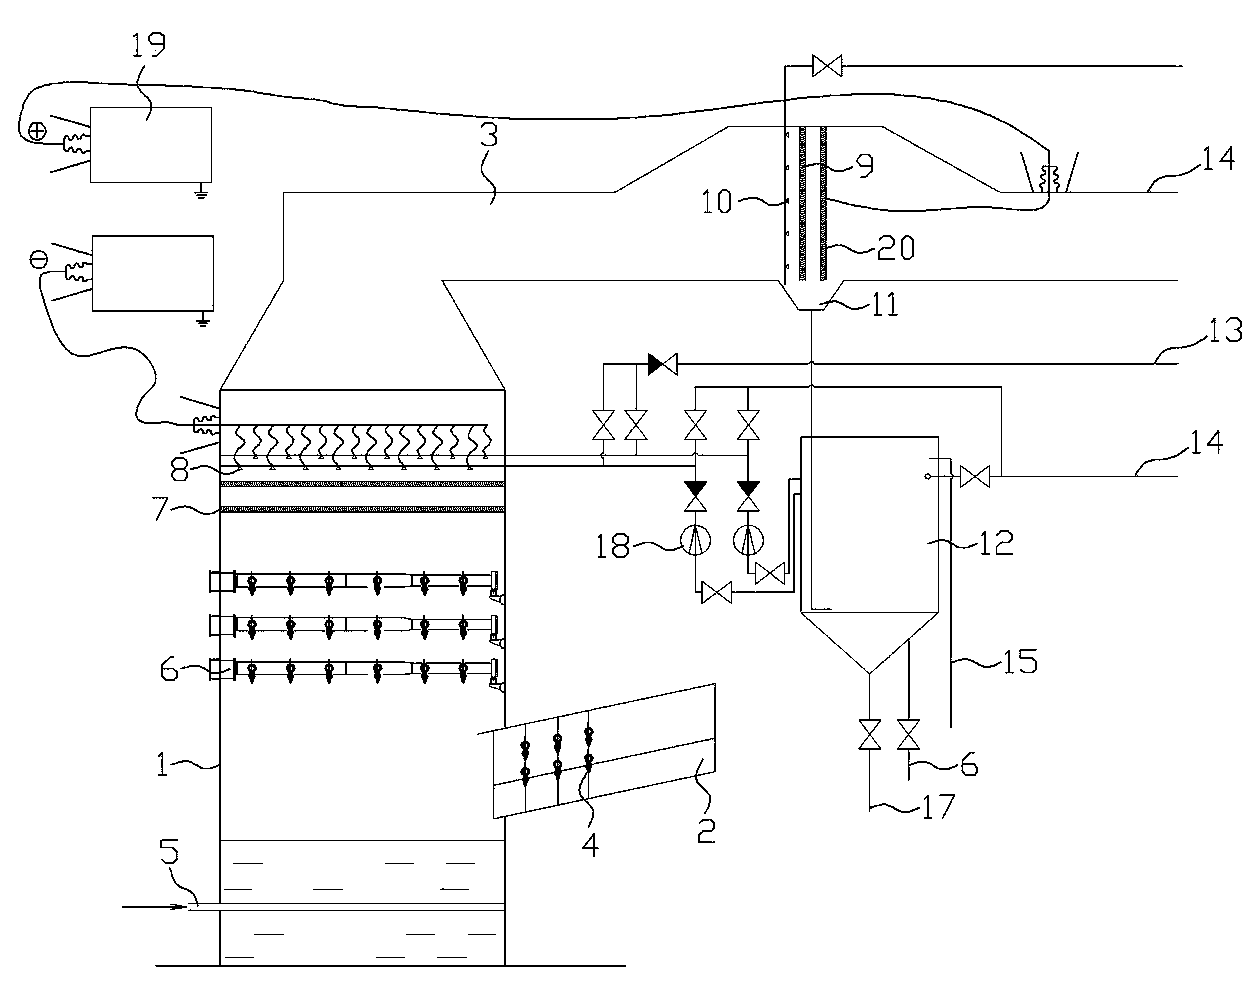 Wet desulfurization system with electrostatic humidifier and anode demister